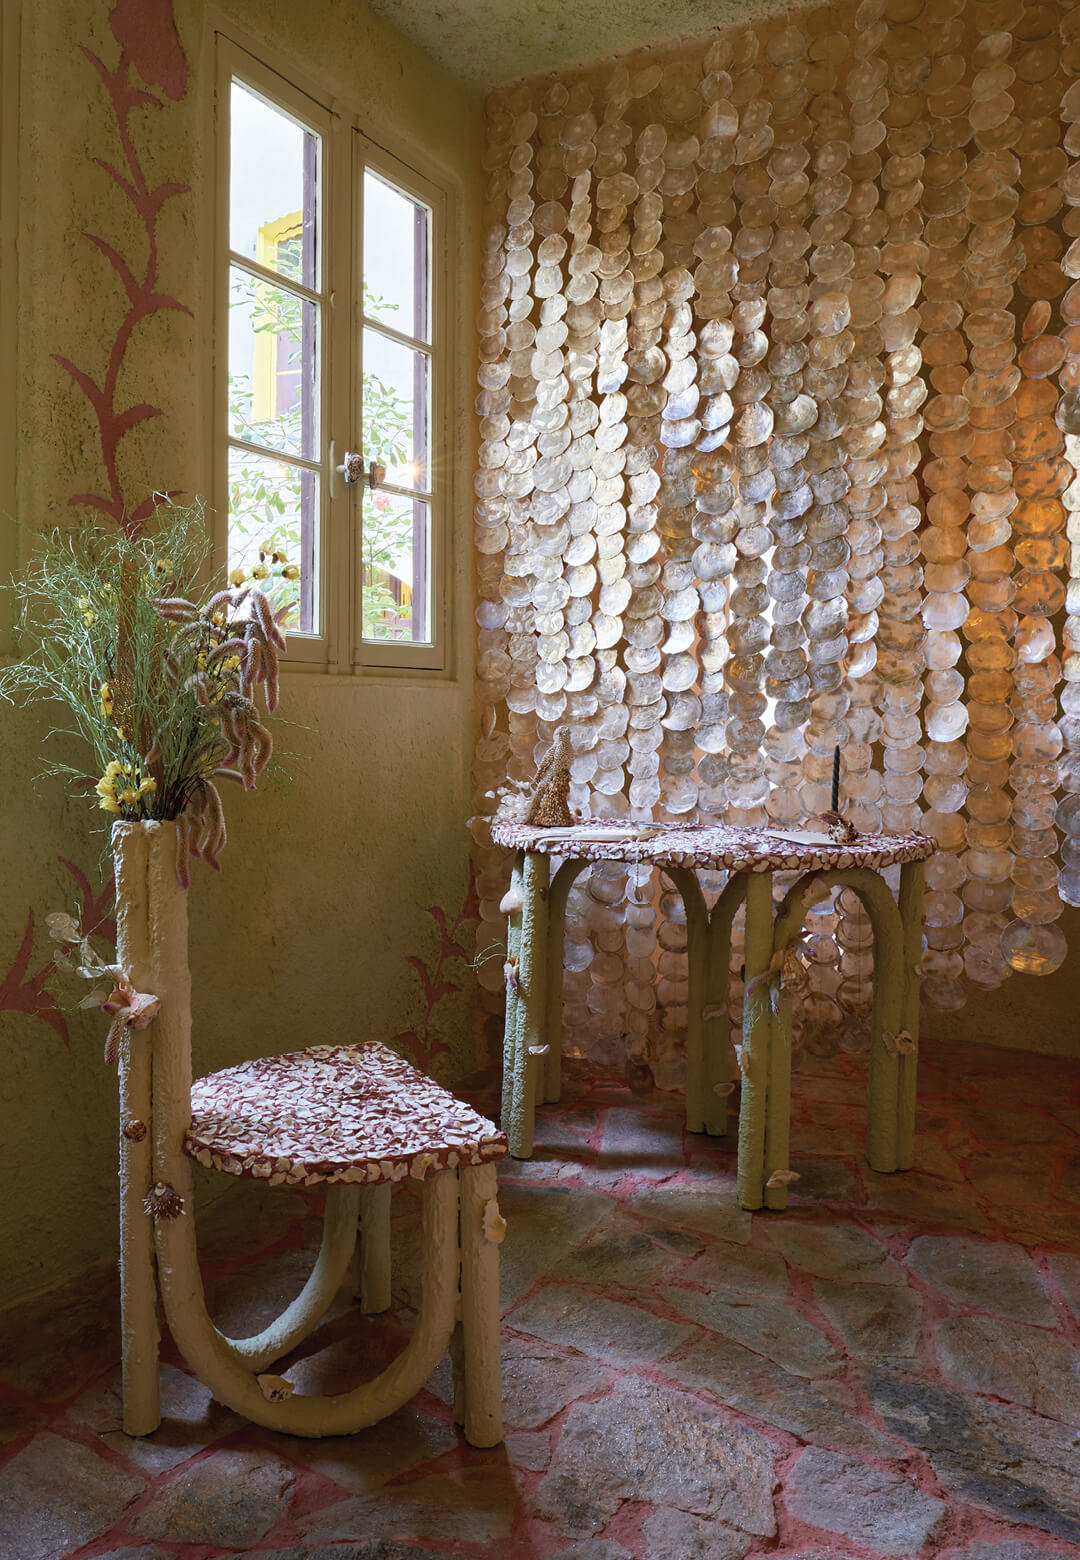 Design Parade Toulon: an exposition of natural scapes and dreamy interiors